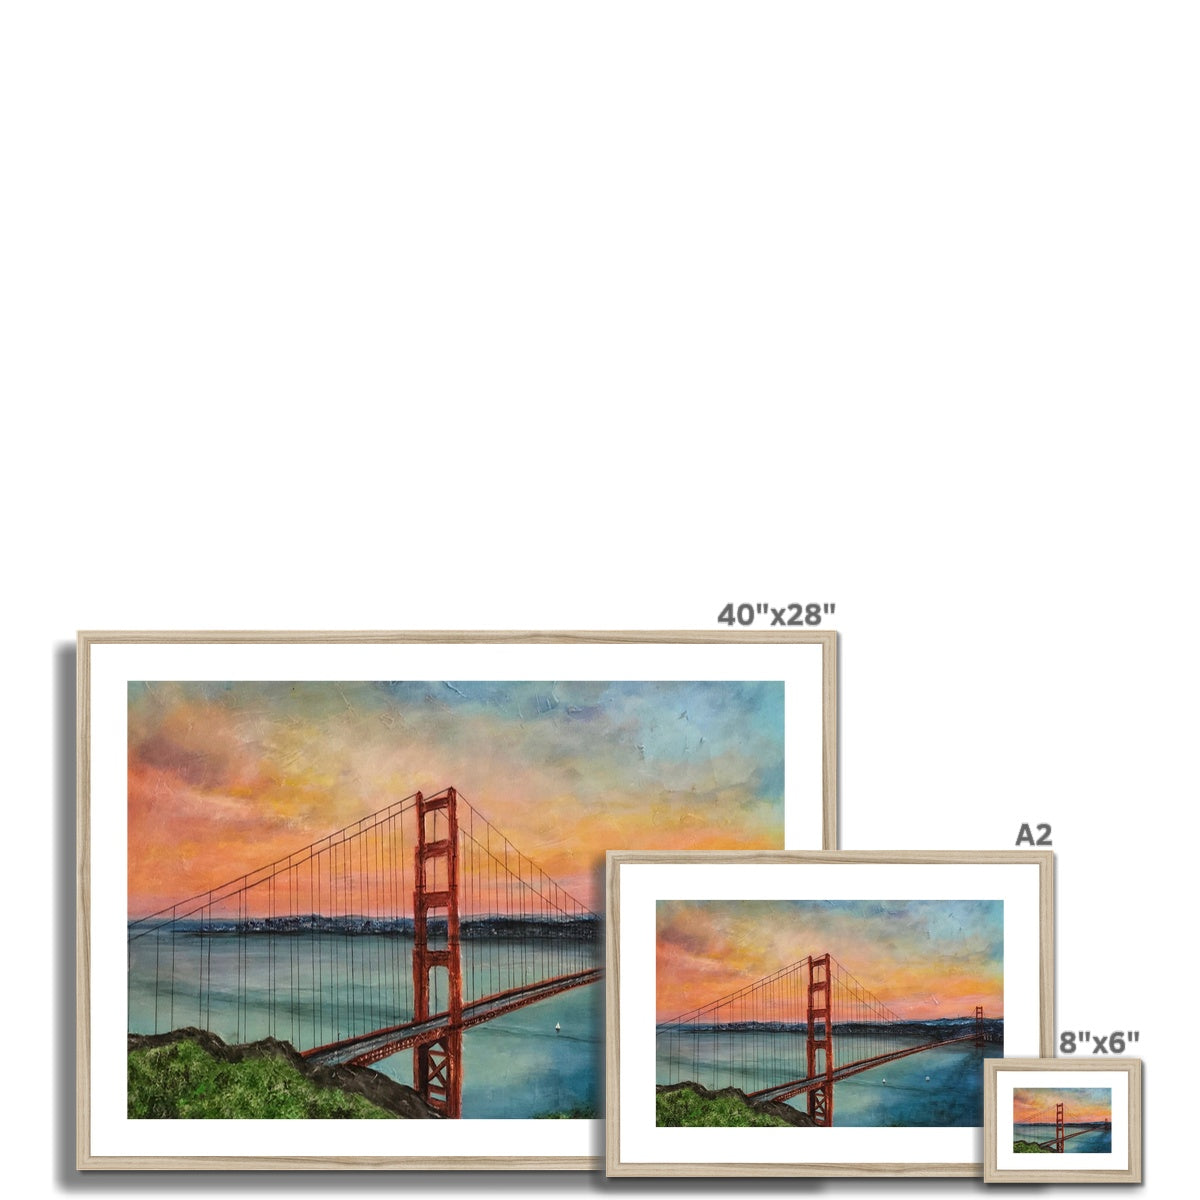 The Golden Gate Bridge Painting | Framed & Mounted Prints From Scotland-Framed & Mounted Prints-World Art Gallery-Paintings, Prints, Homeware, Art Gifts From Scotland By Scottish Artist Kevin Hunter